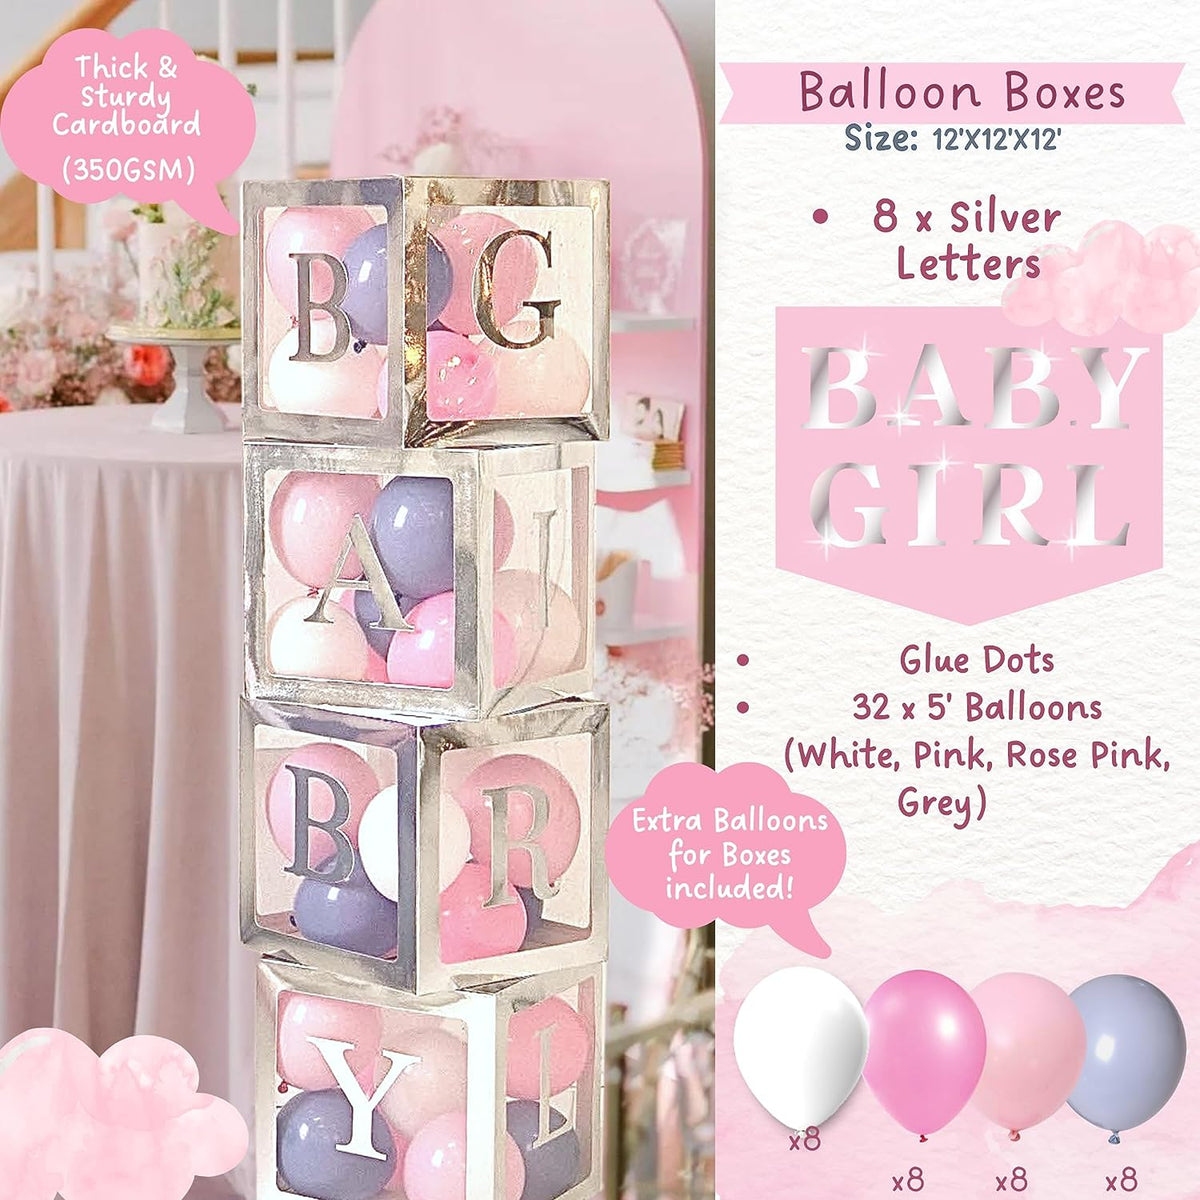 176 pc Baby Shower Decorations for Boy, Birthday Boy, 2 in 1 Set - Balloon  Garland Arch, Balloons Boxes and Banner, Elephant Baby Shower and Birthday